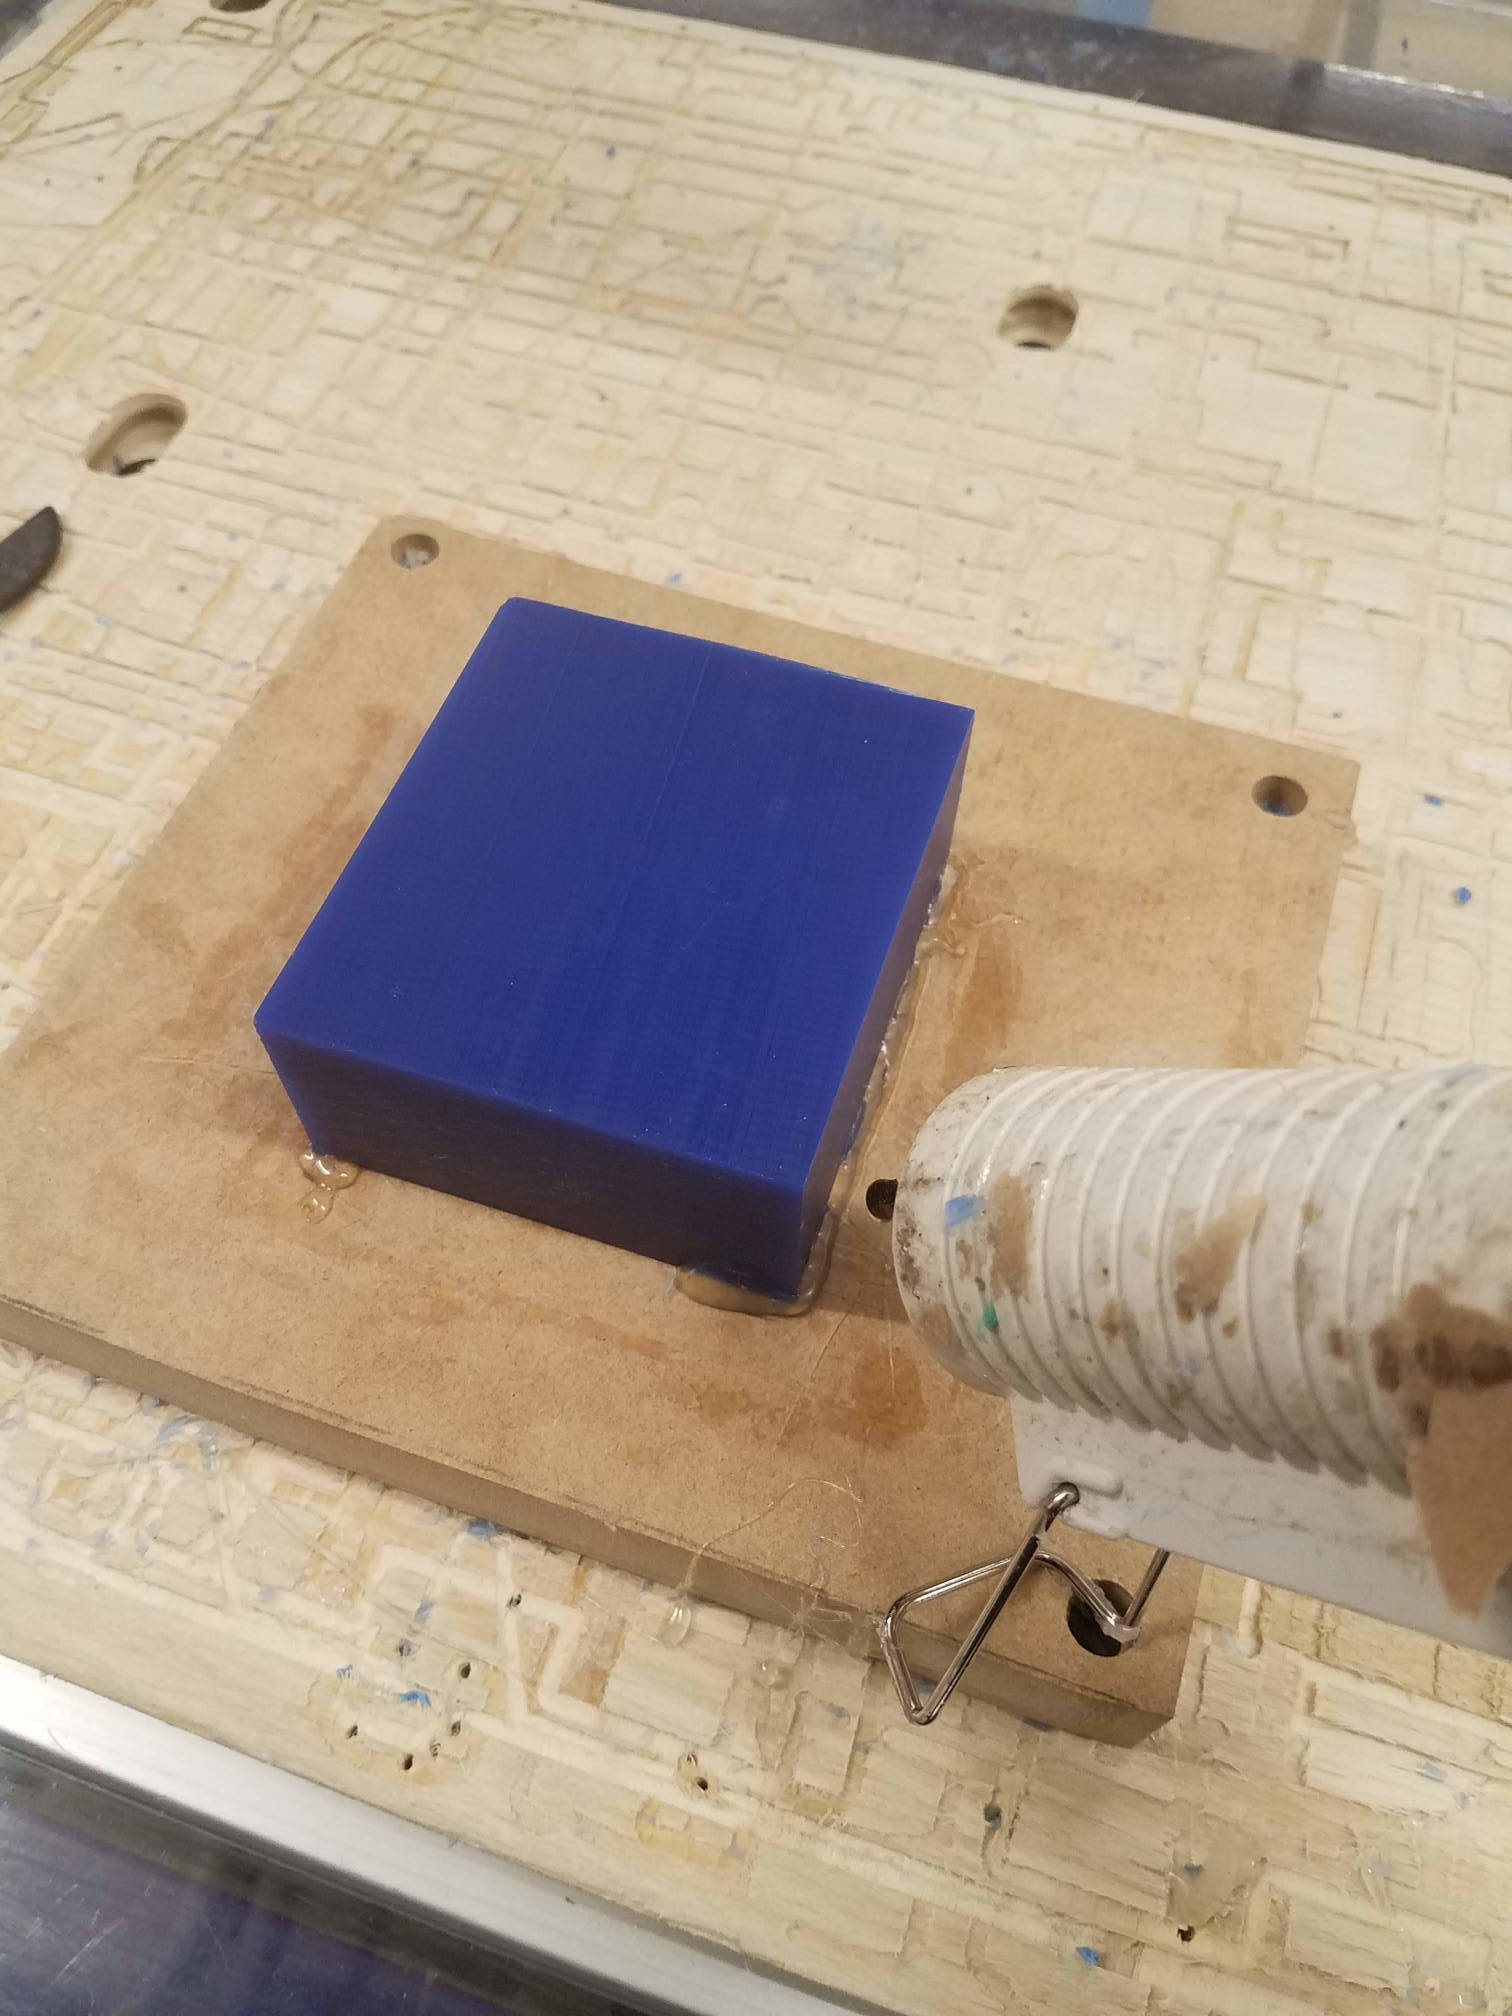 Gluing the block down